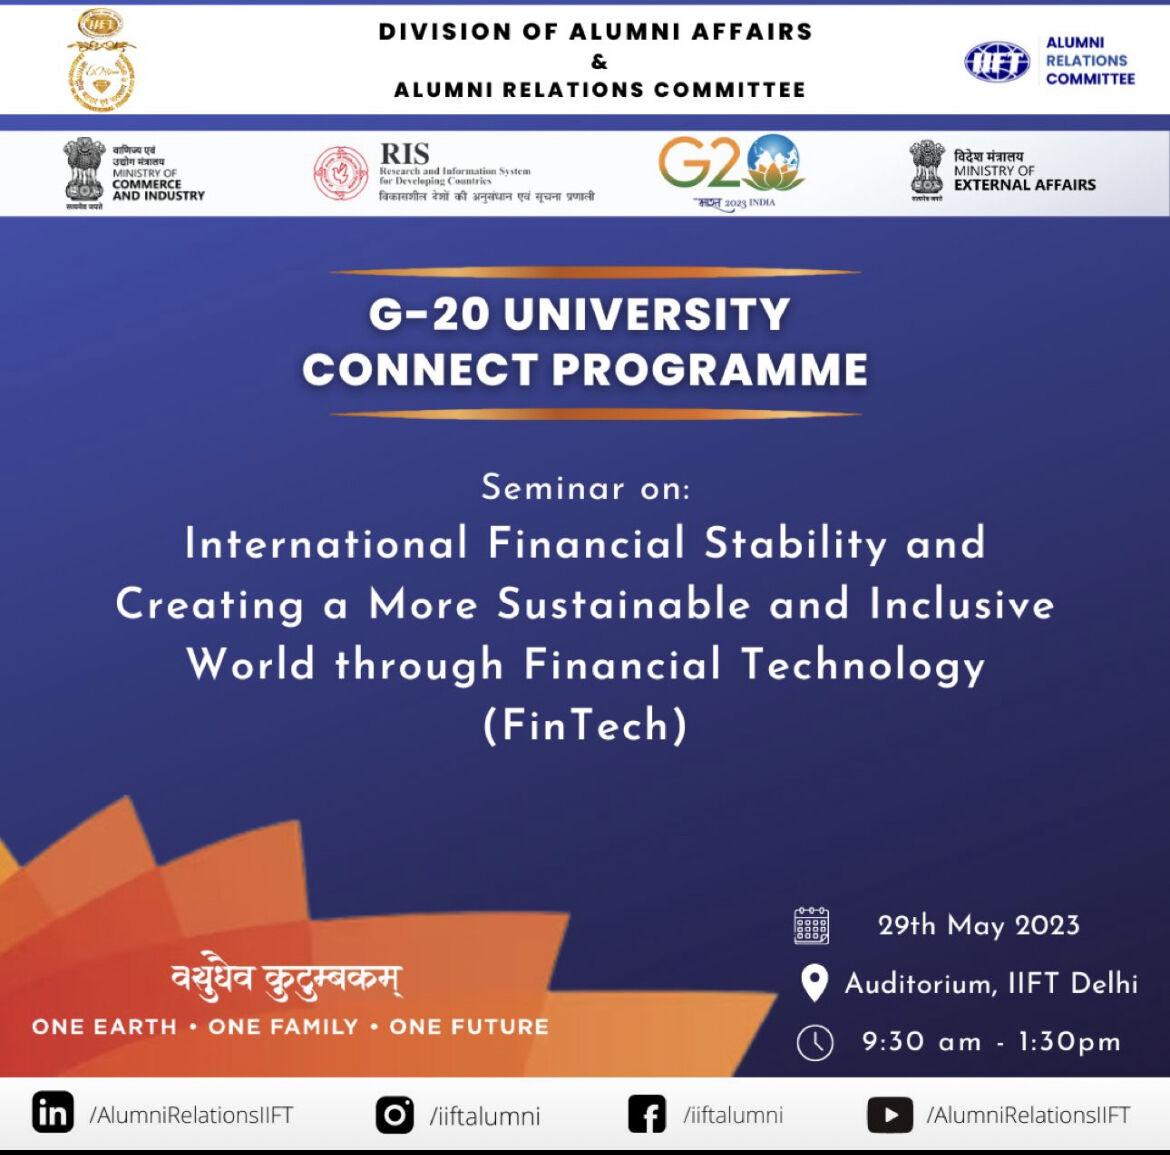 Engaging discussion on #fintechinnovation at #G20India University Connect hosted by @iift1963 
as part of #India #G20presidency.

#IIFT #G20 #roadahead #sustainablefuture #inclusivefinance #fintech #crossbordertrade #crossborderpayments #globaltrade #futureofpayments #CBDCs